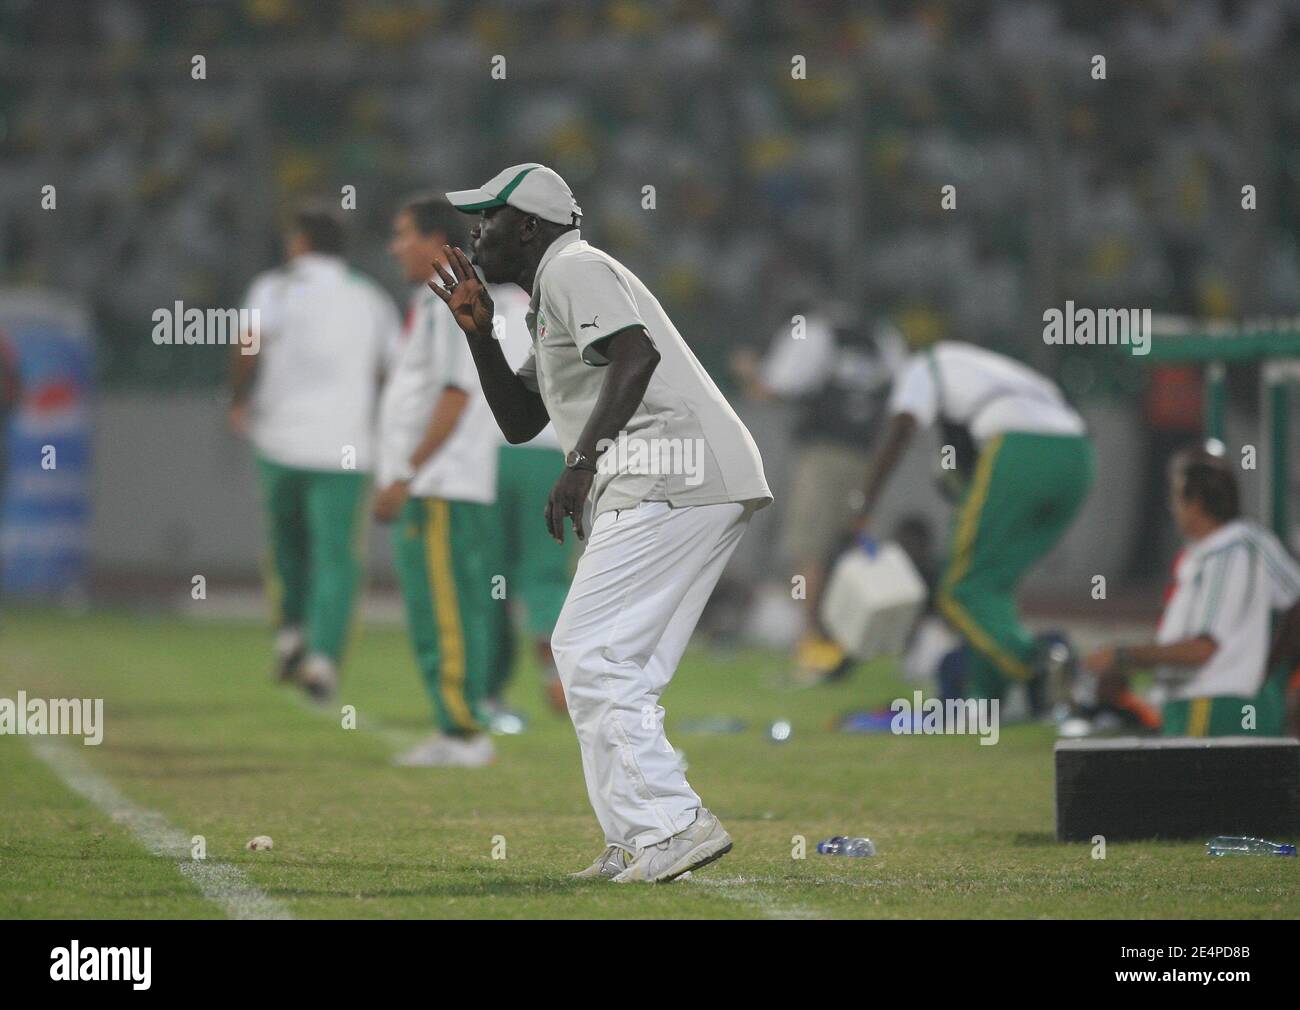 Senegal's coach Lamine NDiaye during the African Cup of Nations soccer match, Senegal vs South Africa in Kumasi, Ghana on January 31, 2008. The match ended in a 1-1 draw. Senegal failed to qualify for the next round of the competition. Photo by Steeve McMay/Cameleon/ABACAPRESS.COM Stock Photo